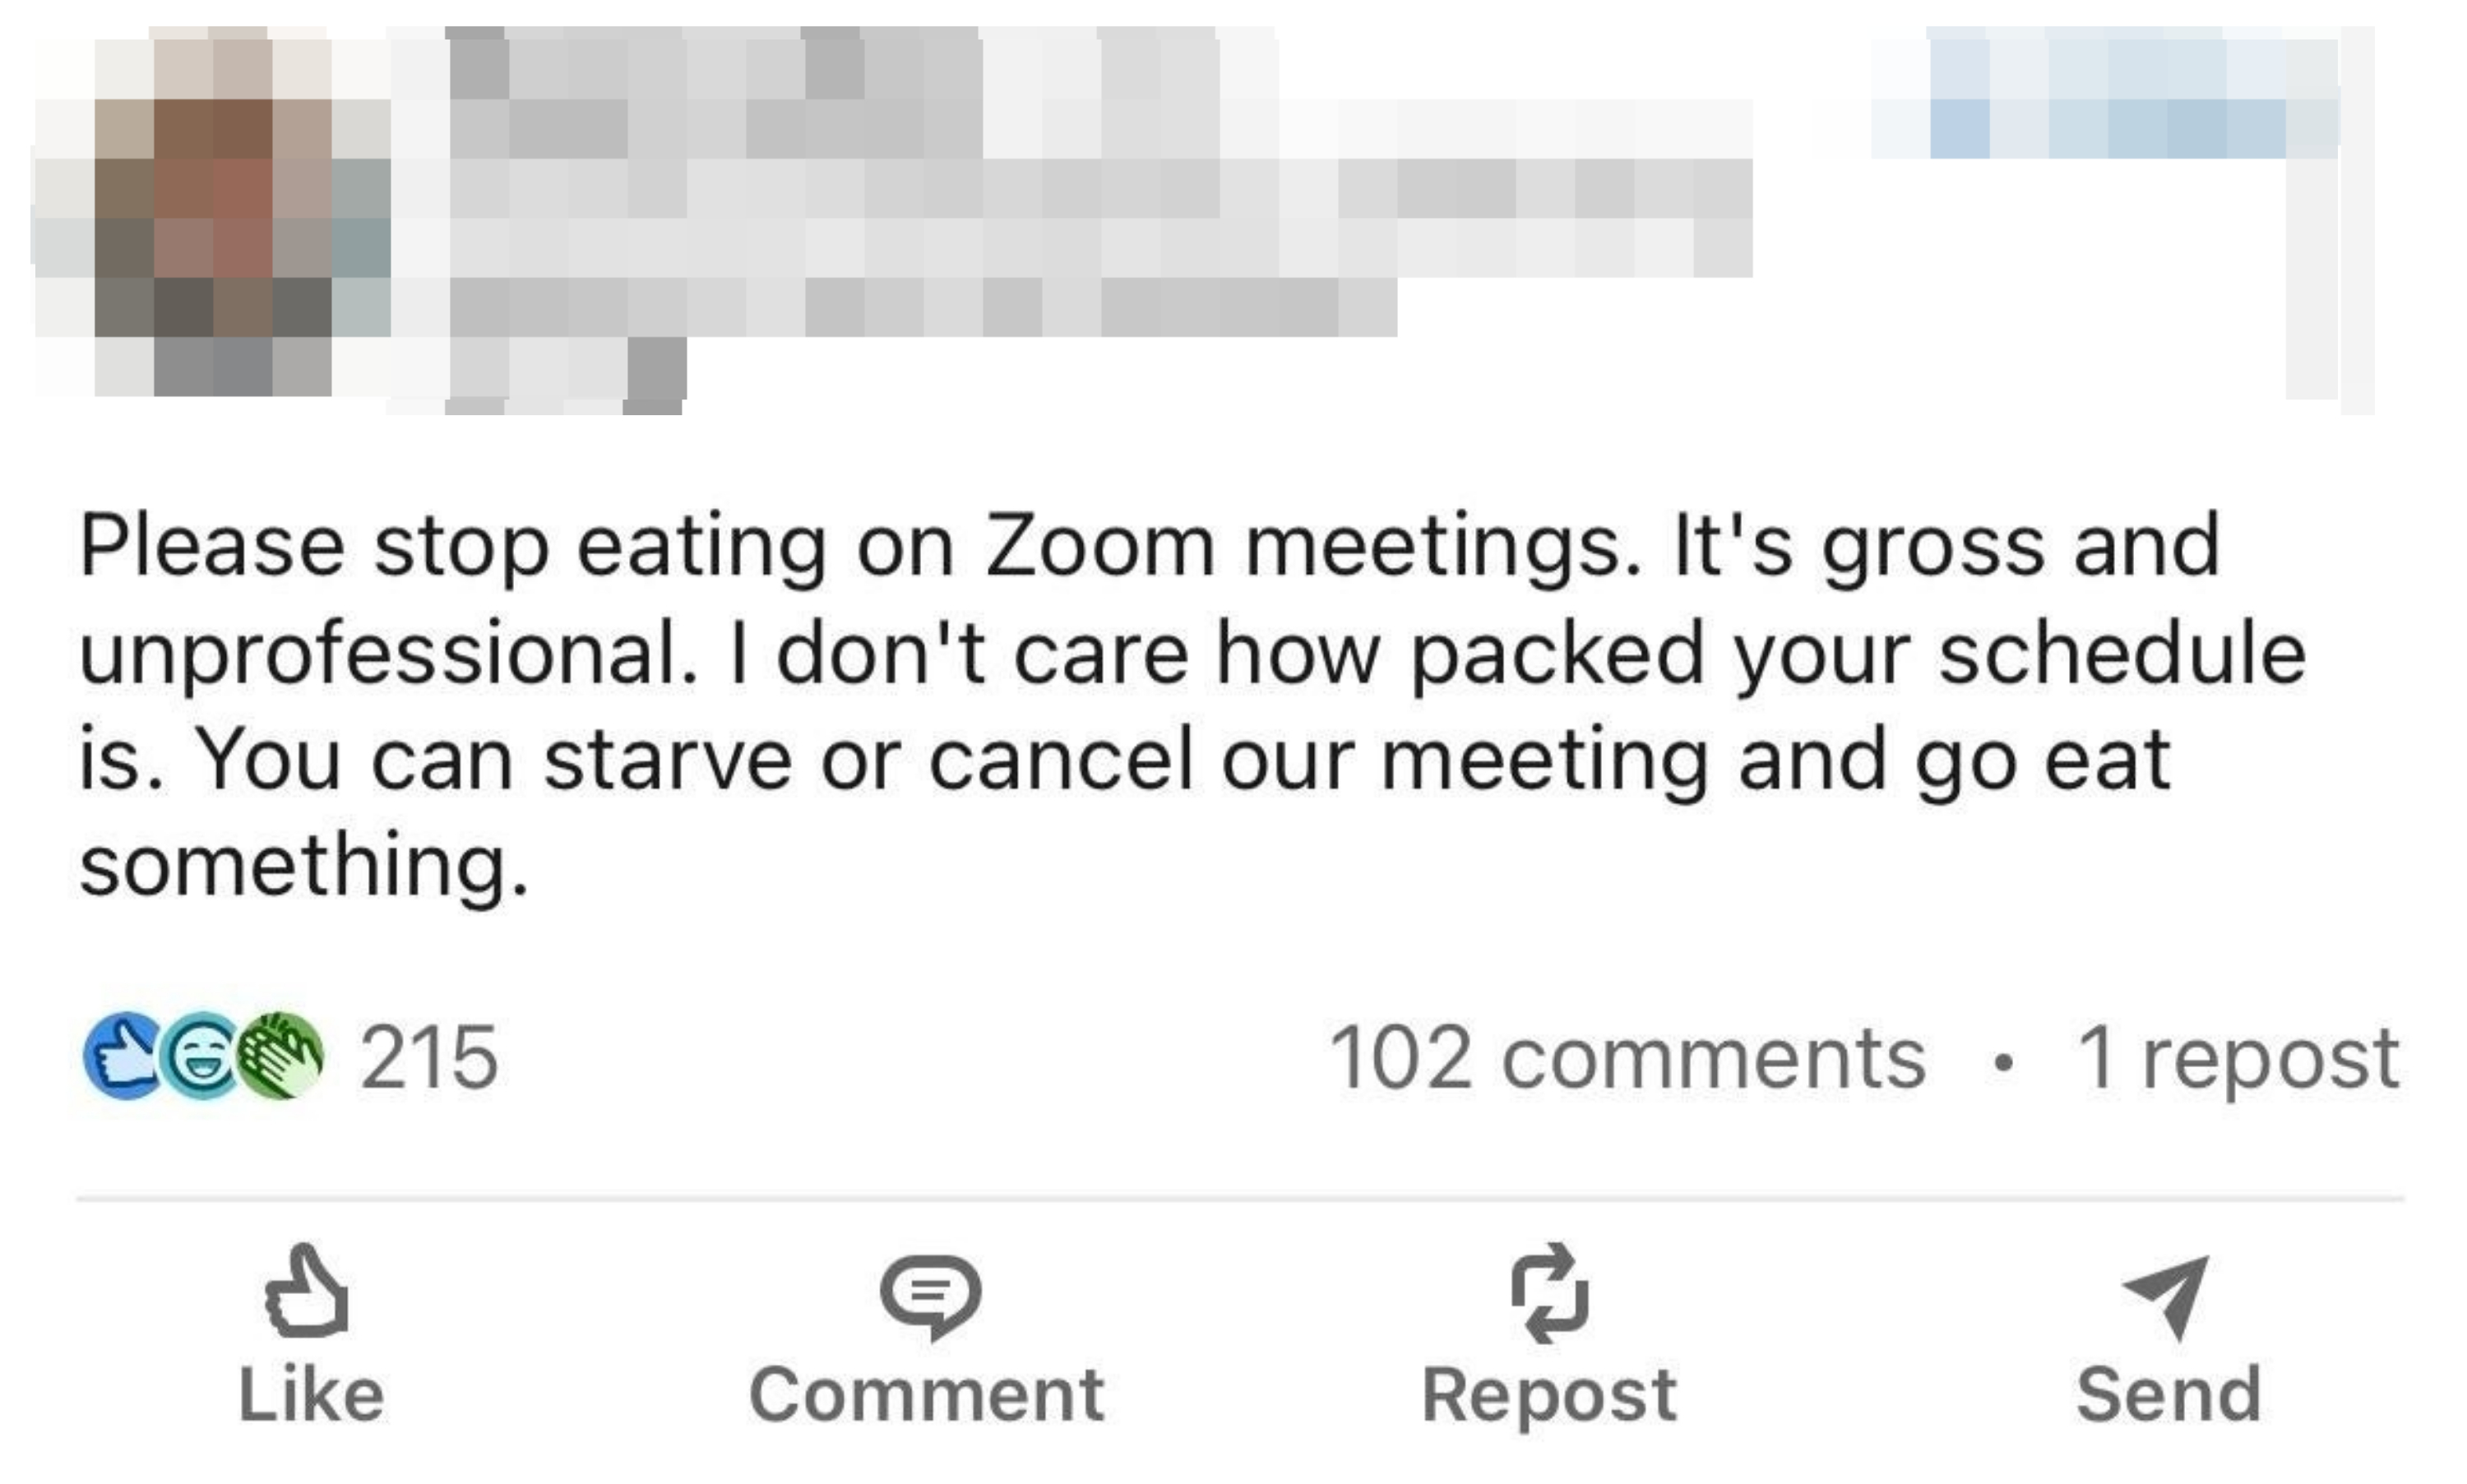 &quot;You can starve or cancel our meeting and go eat something.&quot;